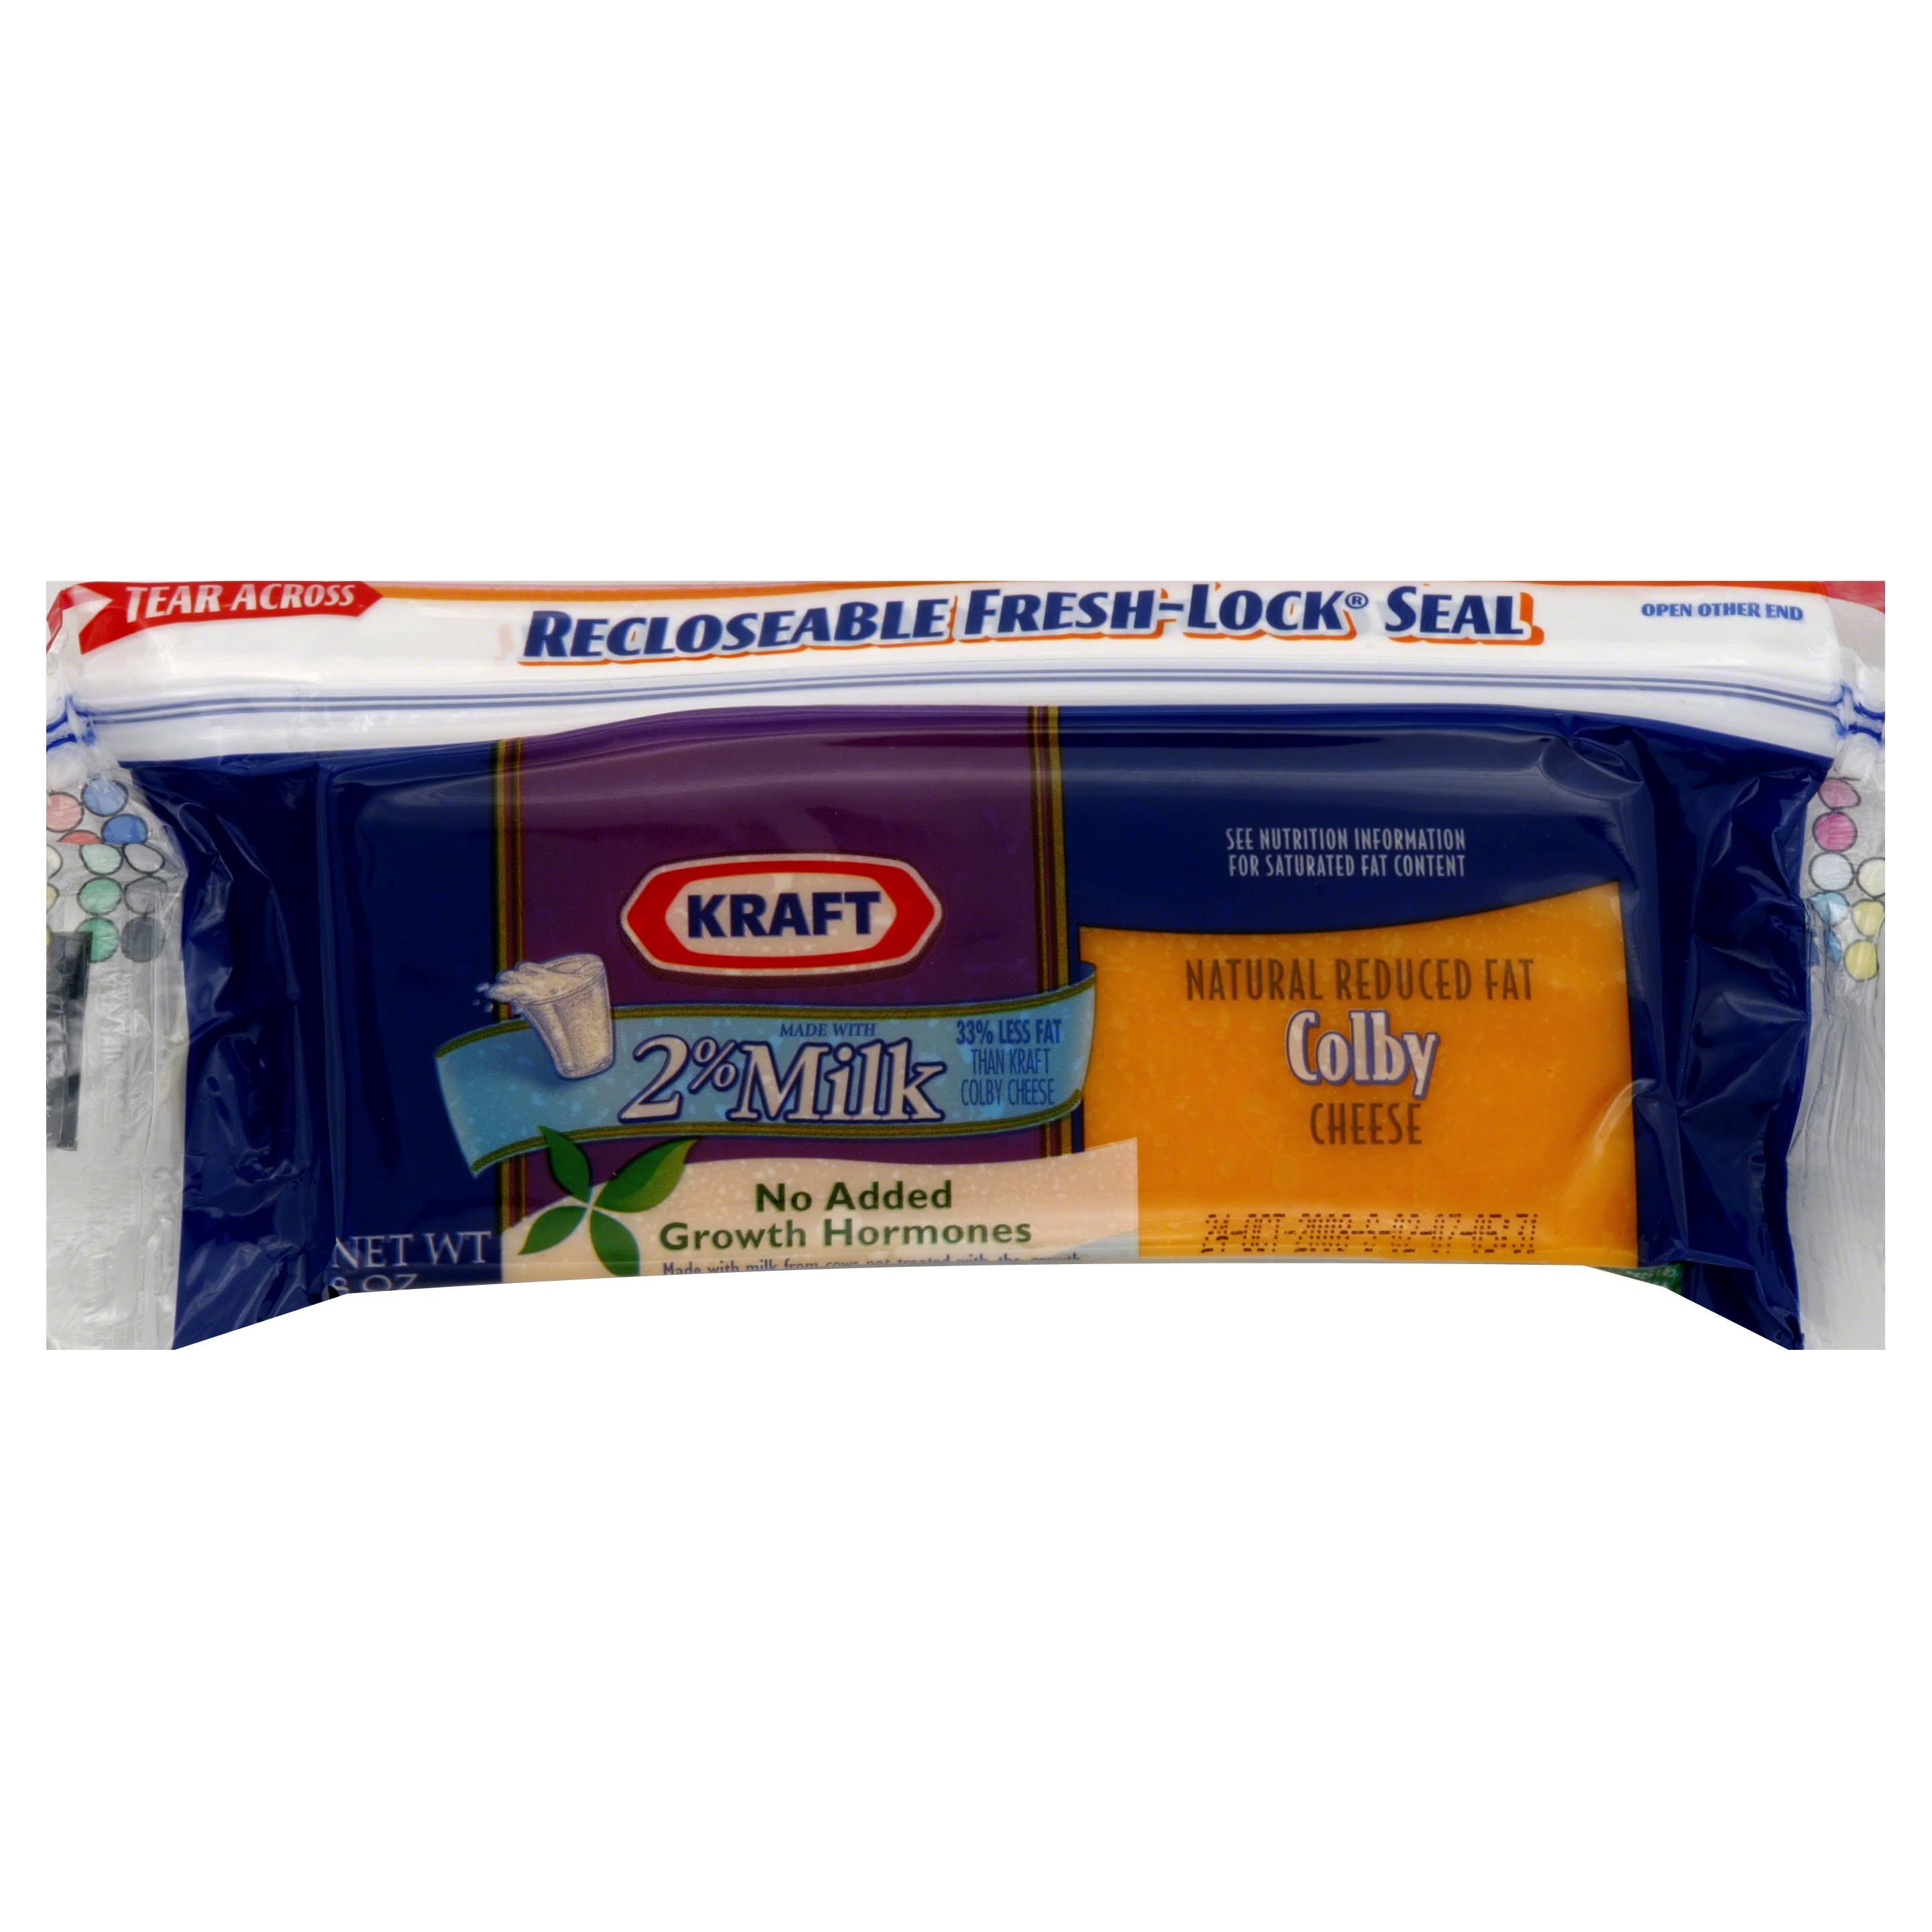 Kraft Cheese, Natural Reduced Fat Colby - 8 oz